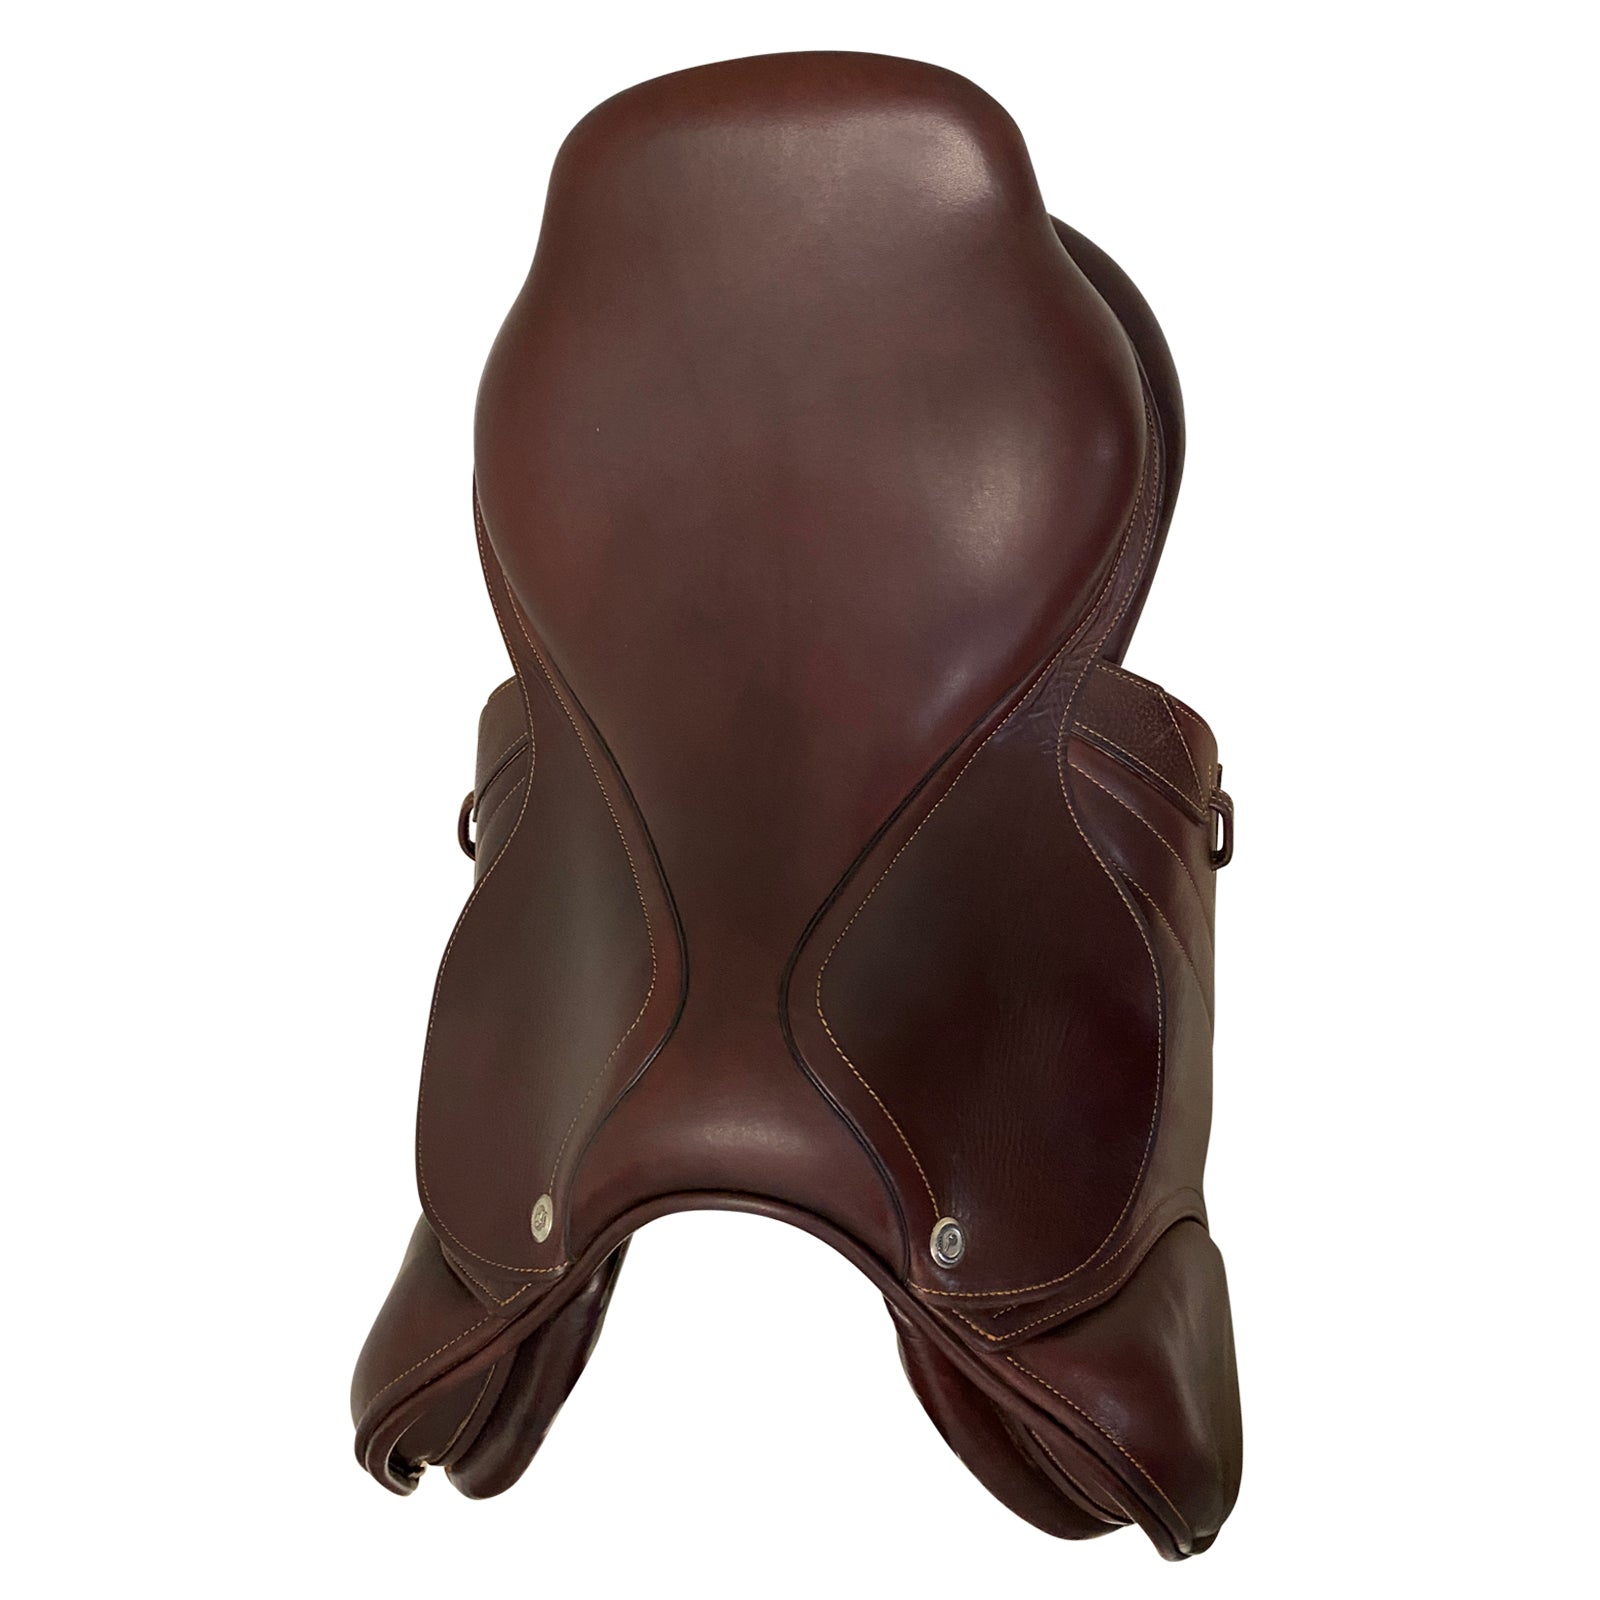 Top of CWD 2017 SE02 Saddle in Brown